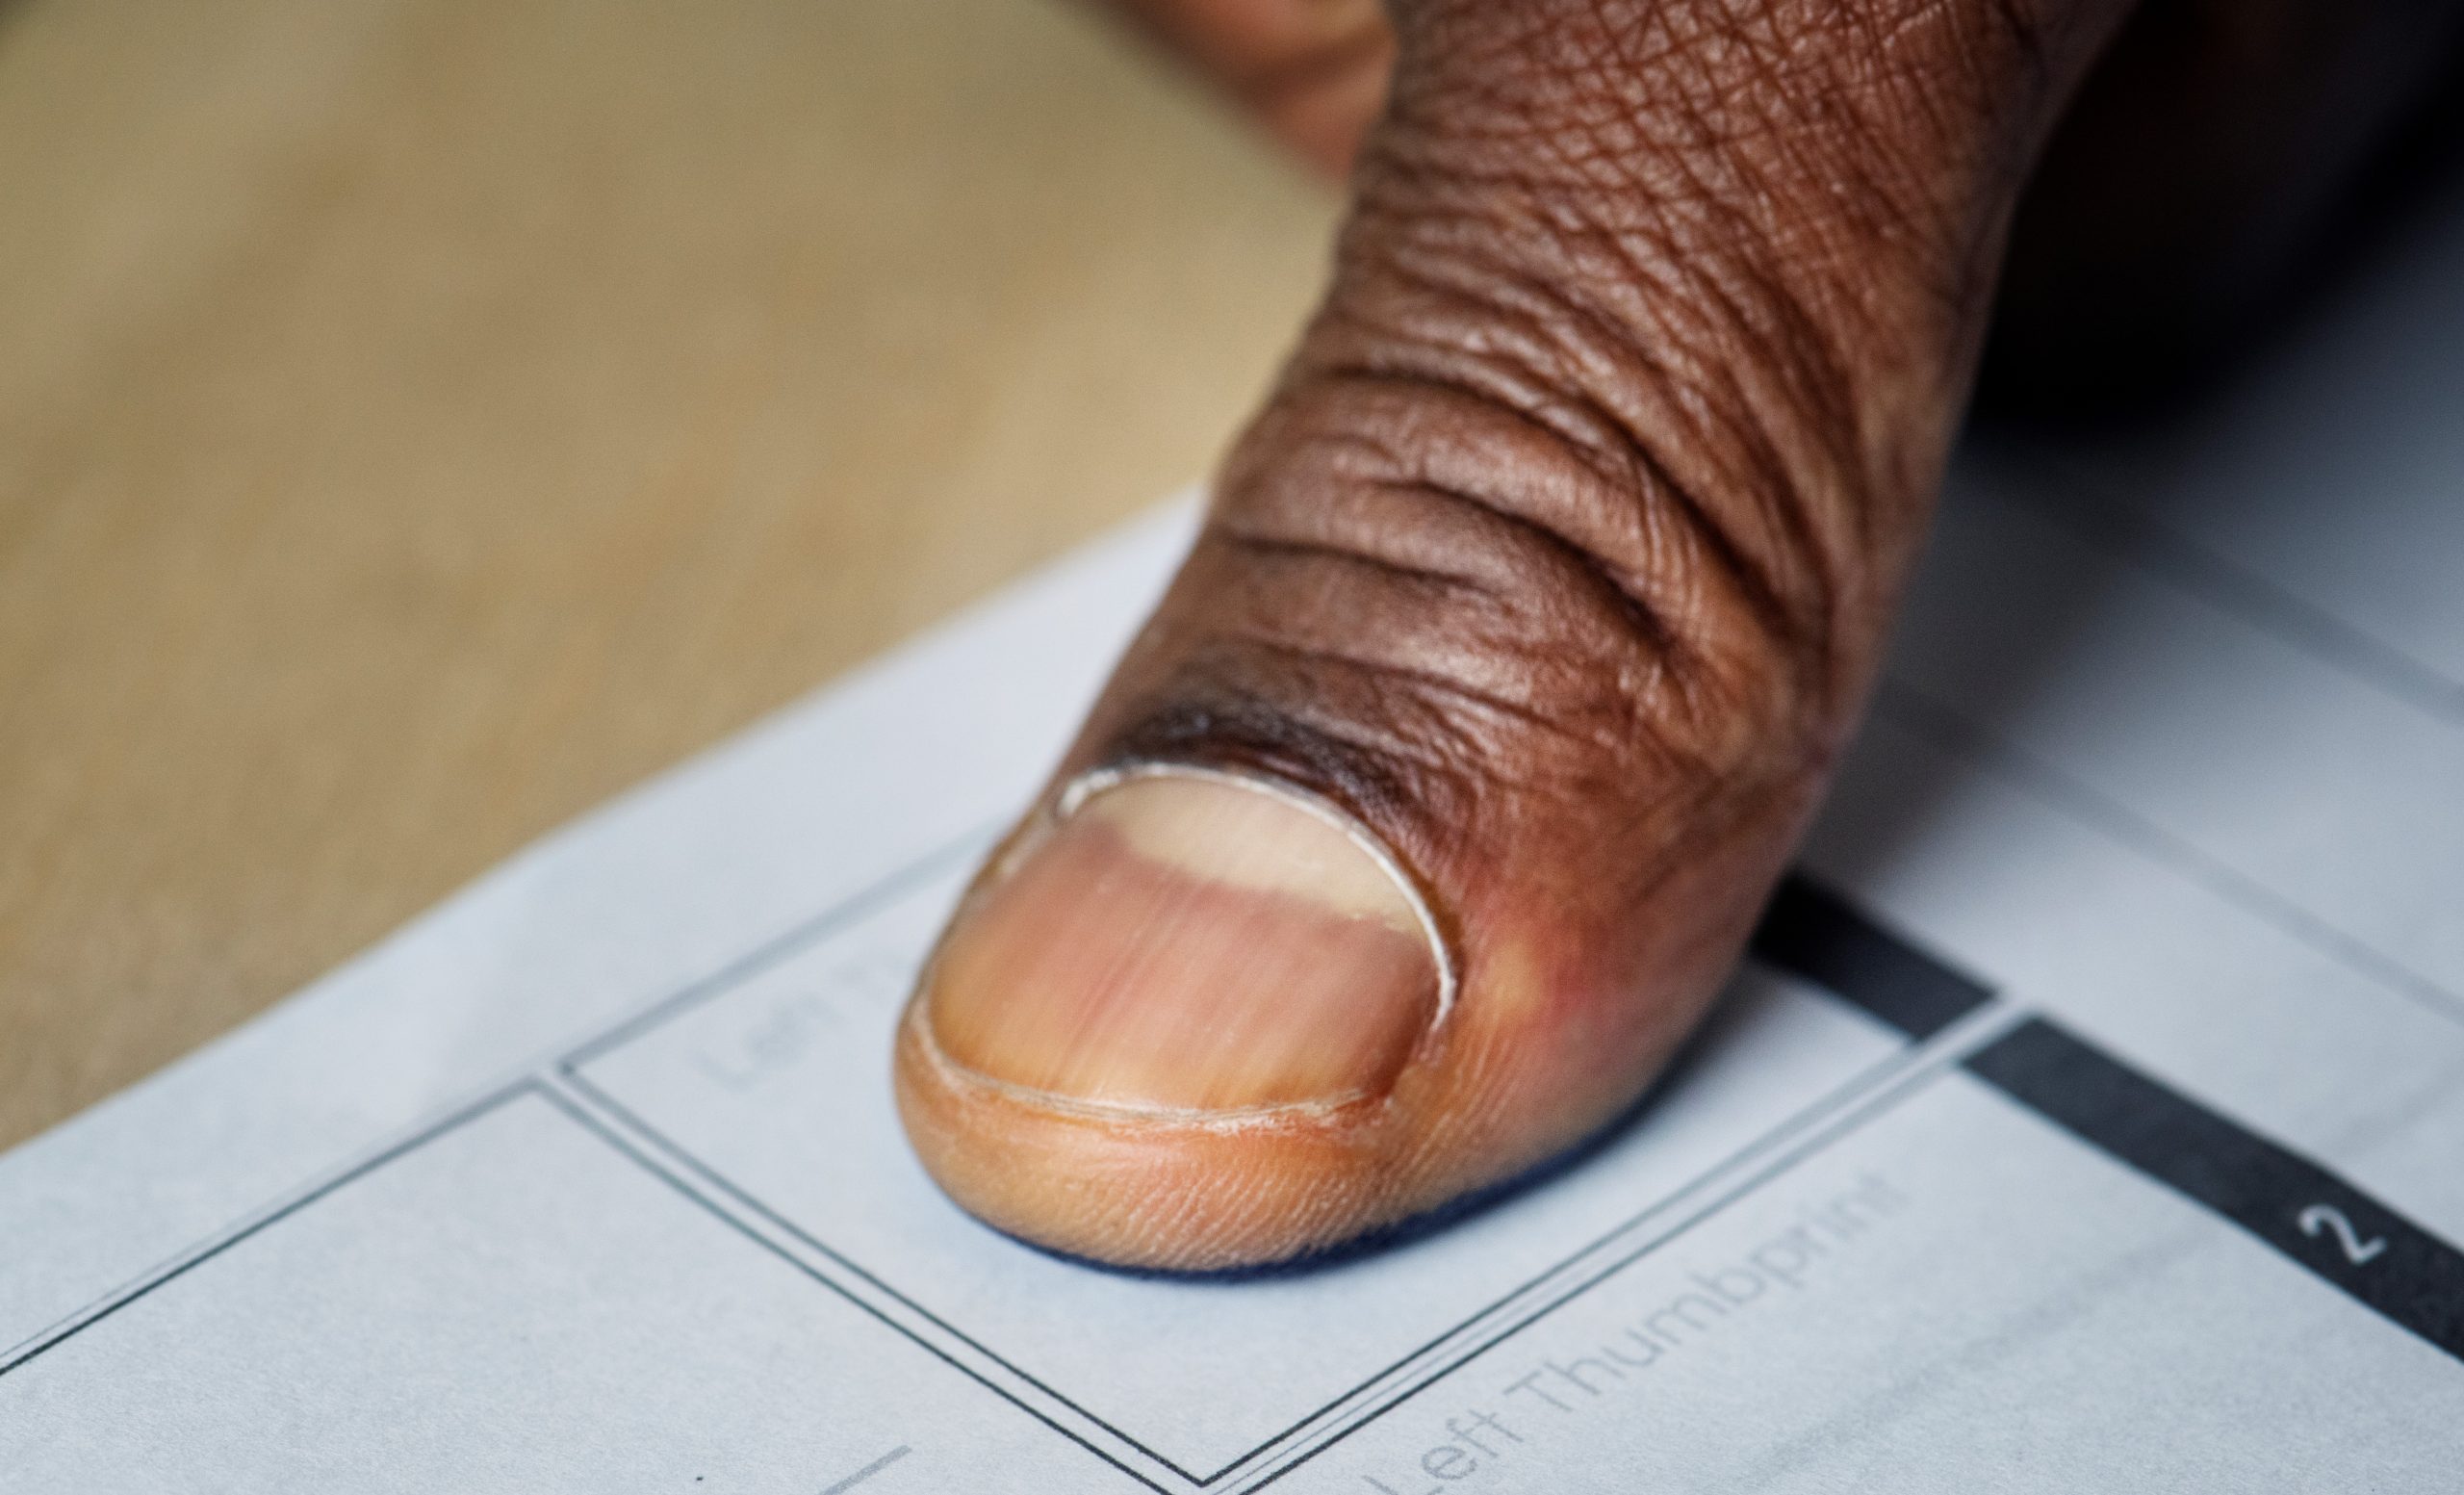 CWCDAfrica: The Importance of Voter Education in Nigeria